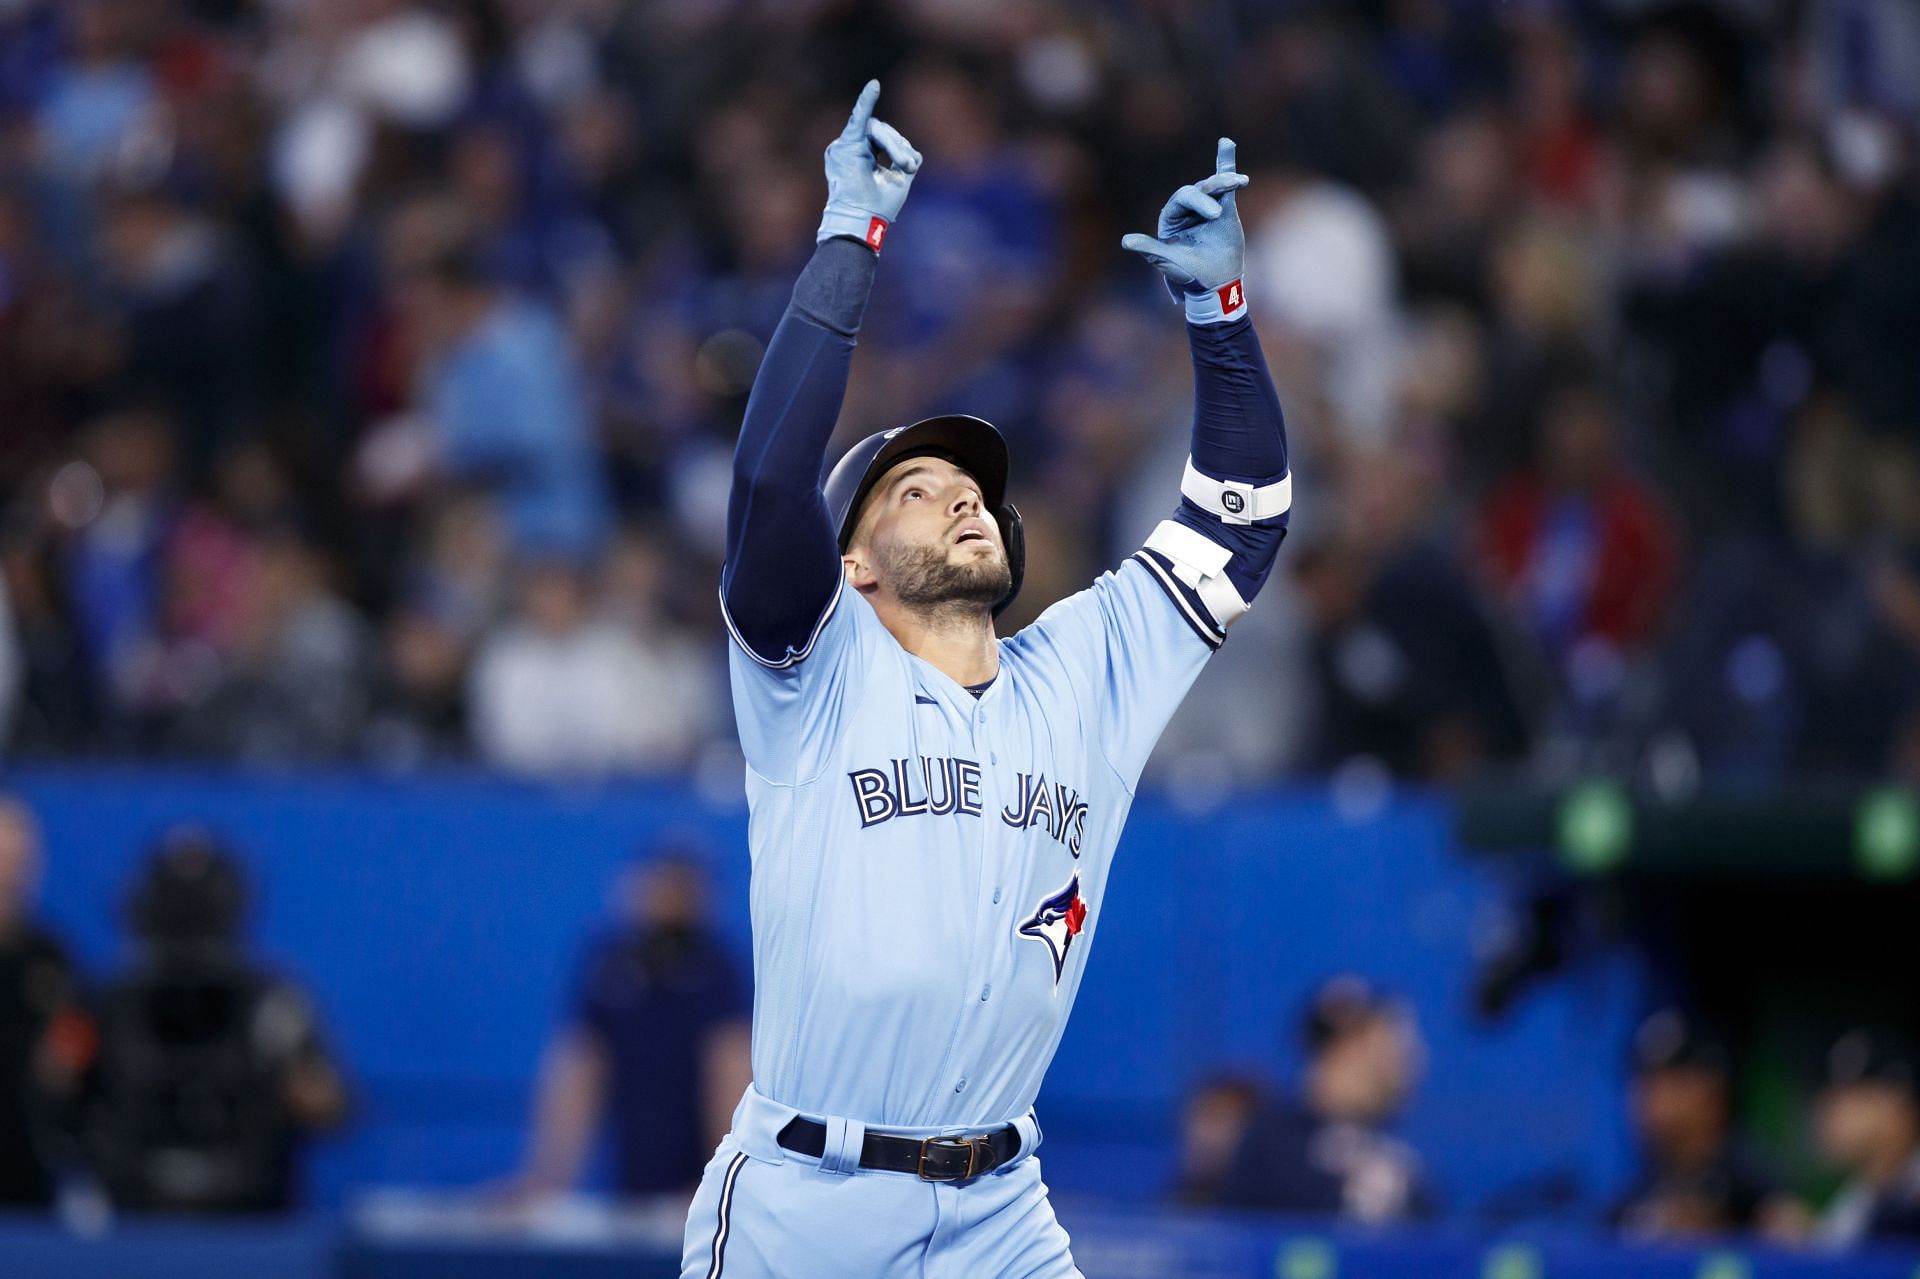 Toronto Blue Jays outfielder George Springer is doing wonders for the club out of the leadoff spot